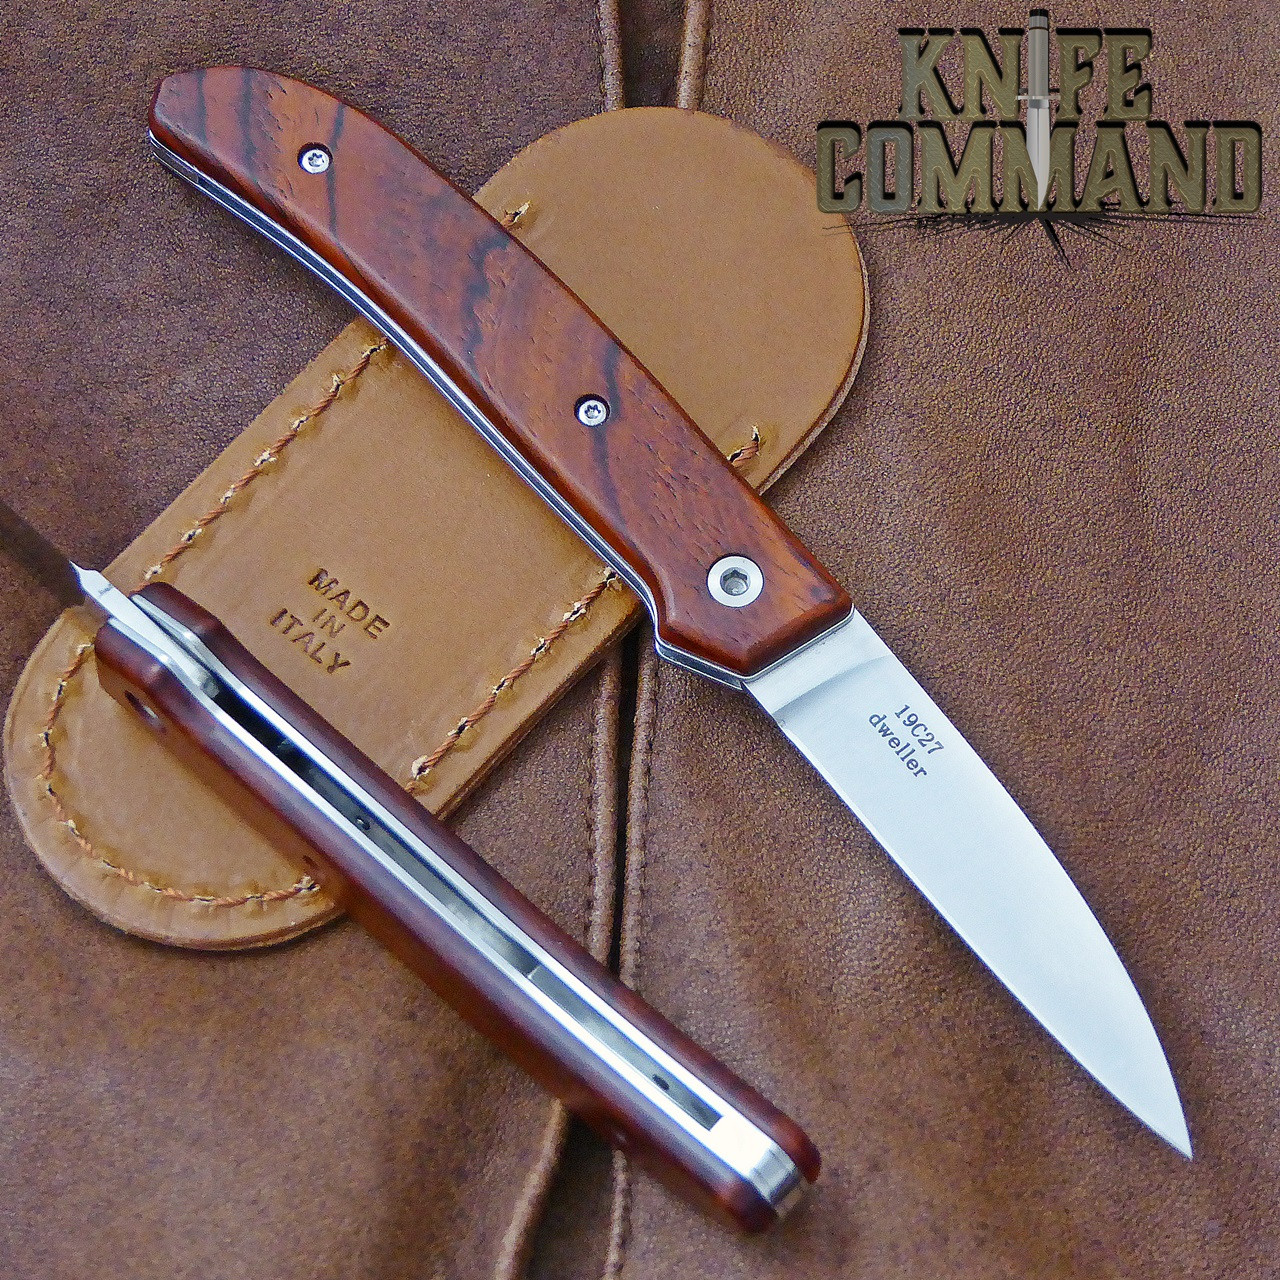 Fantoni Dweller Cocobolo S Italian Made Slip-joint EDC Pocket Knife.  Now with stainless steel liners.  